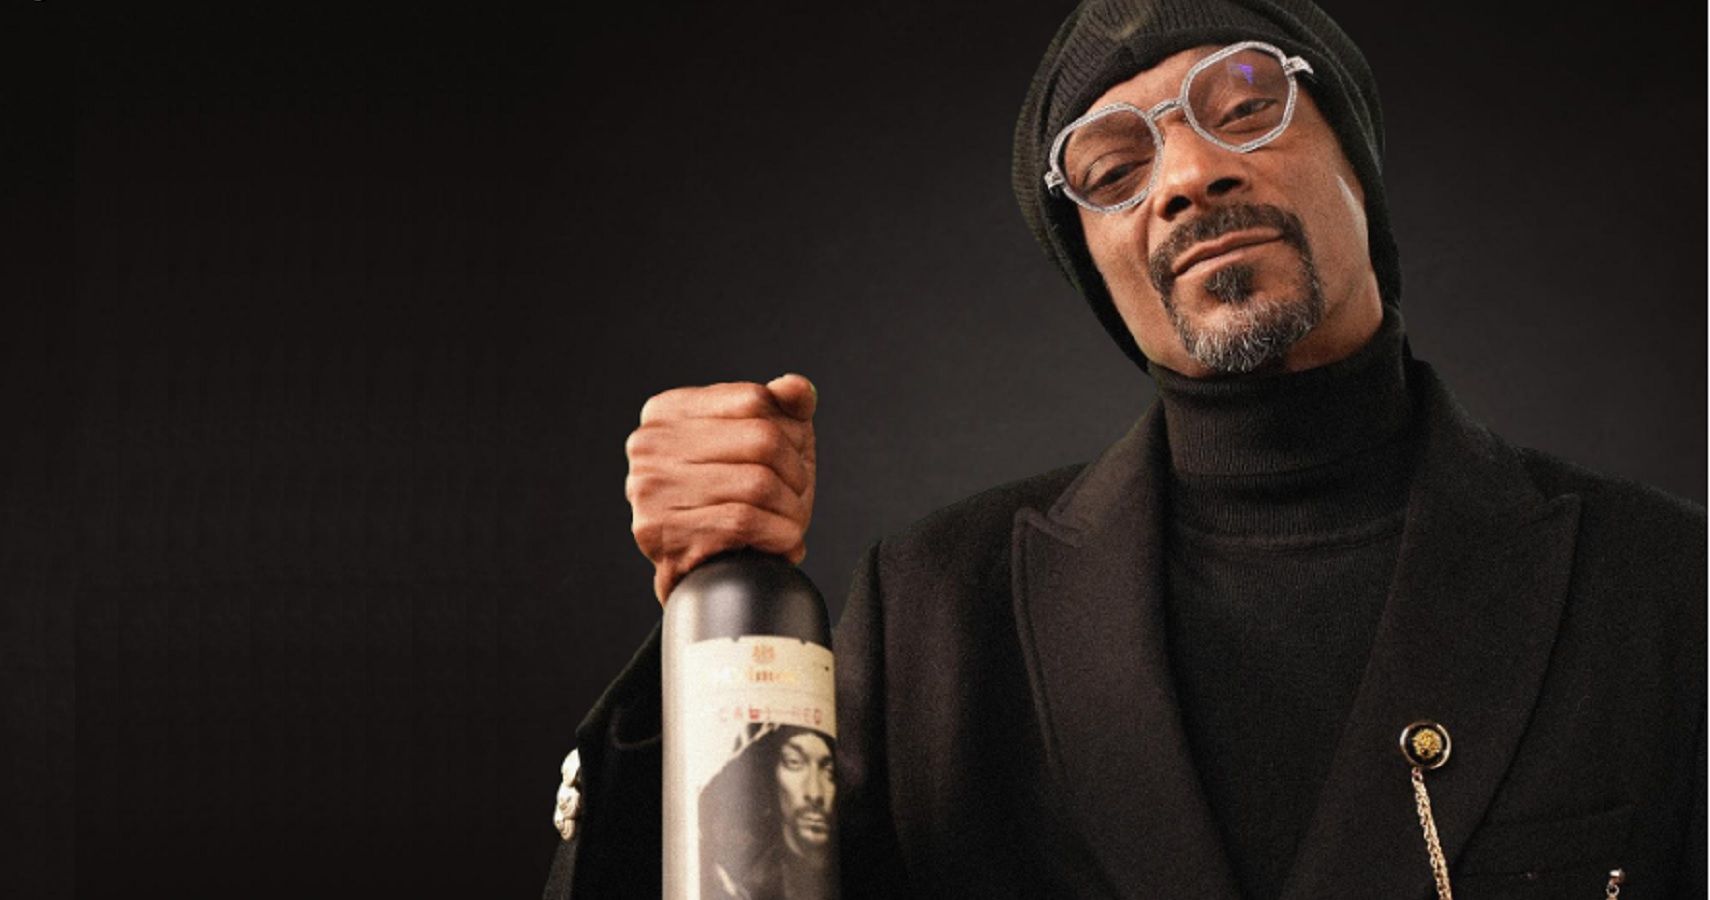 The 10 HighestSelling Albums Of Snoop Dogg, Ranked